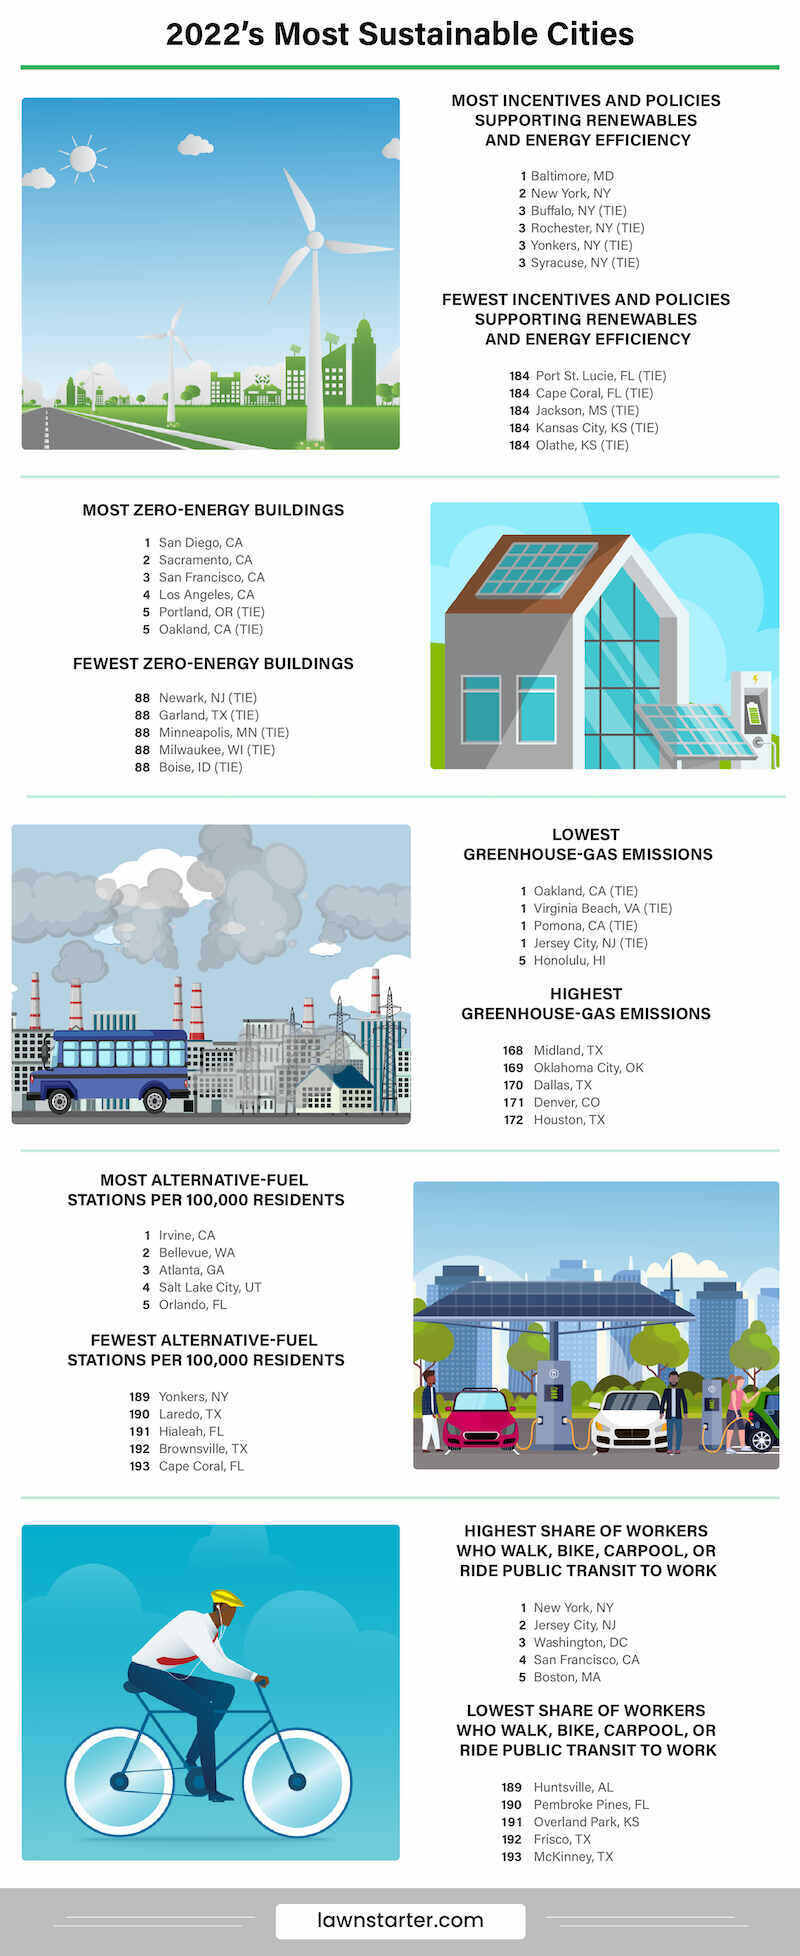 Infographic showing 2022's most sustainable cities, a ranking based on sustainable policies, infrastructure, transportation, food production, and pollution levels